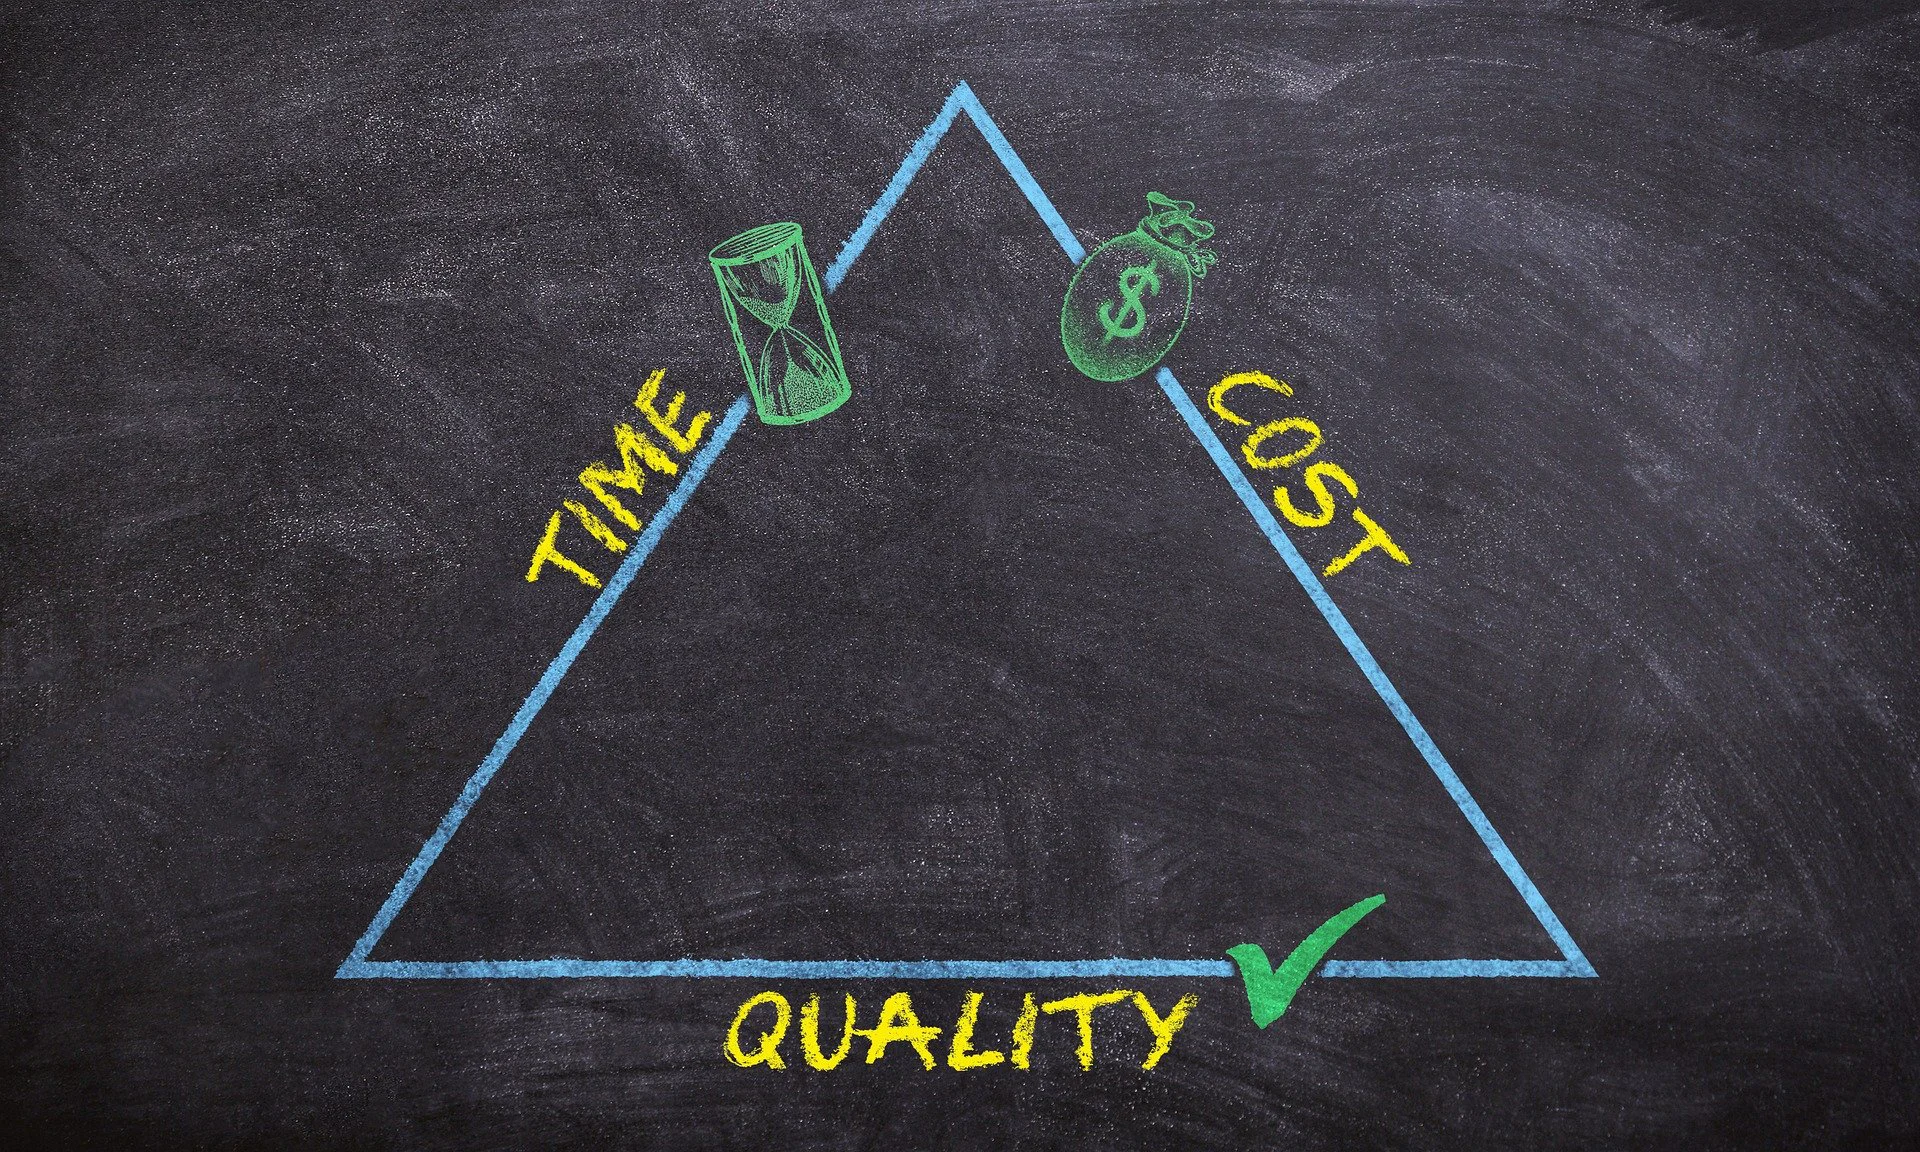 A blue triangle is drawn on a black chalkboard, illustrating the relationship between time, cost, and quality